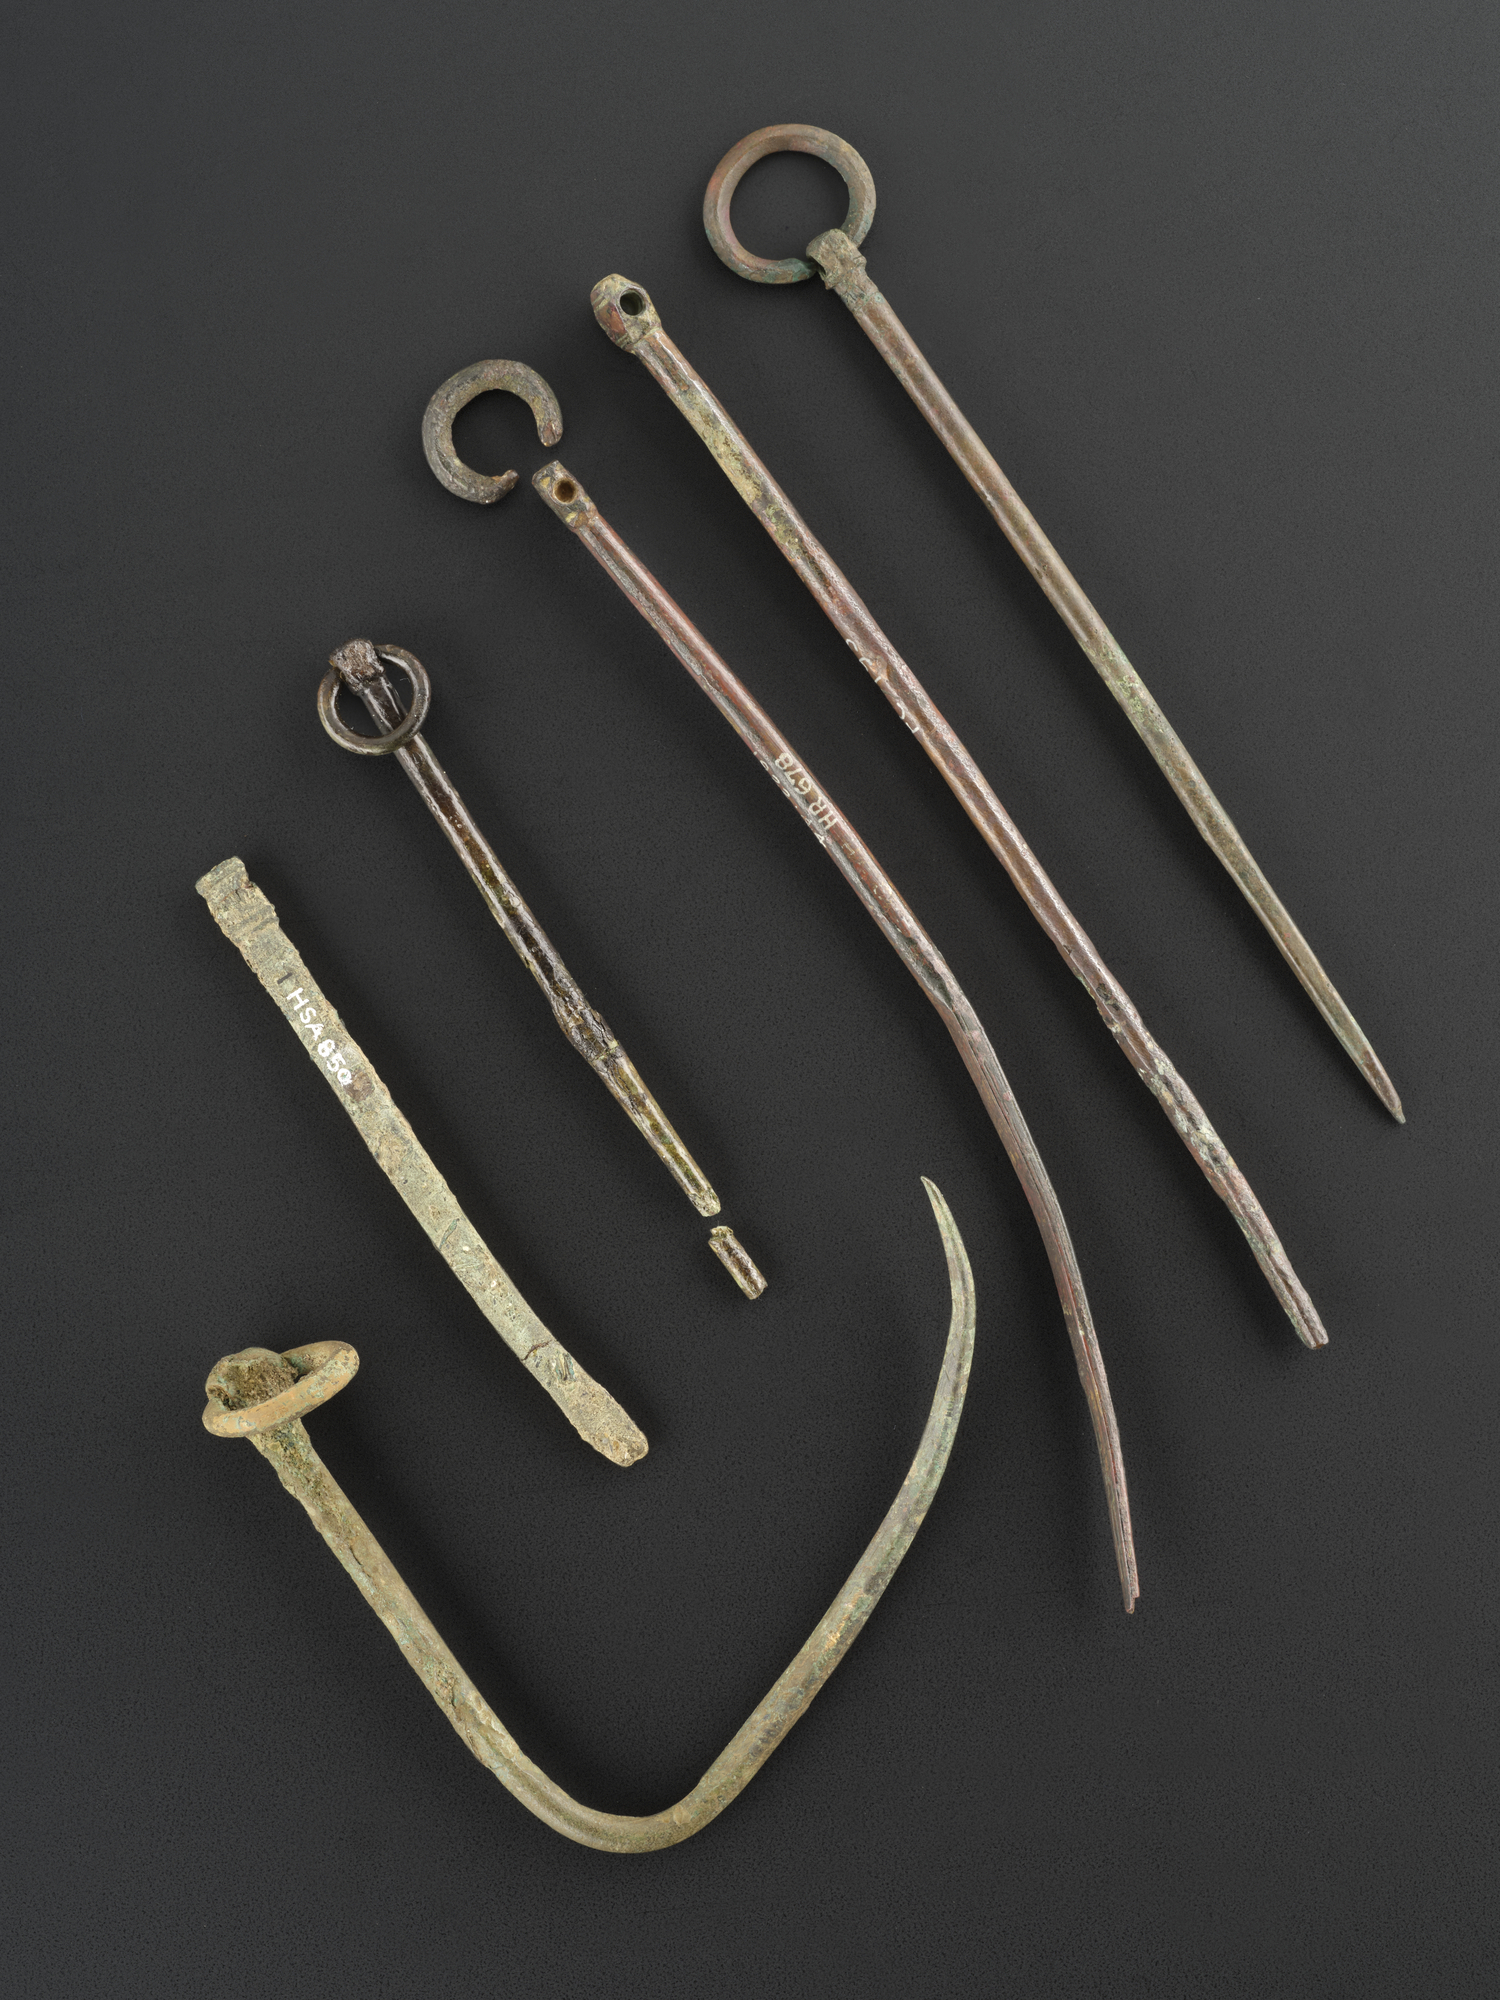 Image of Plain-ringed, polyhedral-headed type, copper alloy pin with decorated head and shank, the upper portion is round-sectioned and the lower portion sub-rectangular in section, the shank curves back very sharply into a hook, from Machrins, Colonsay, Argyll © National Museums Scotland